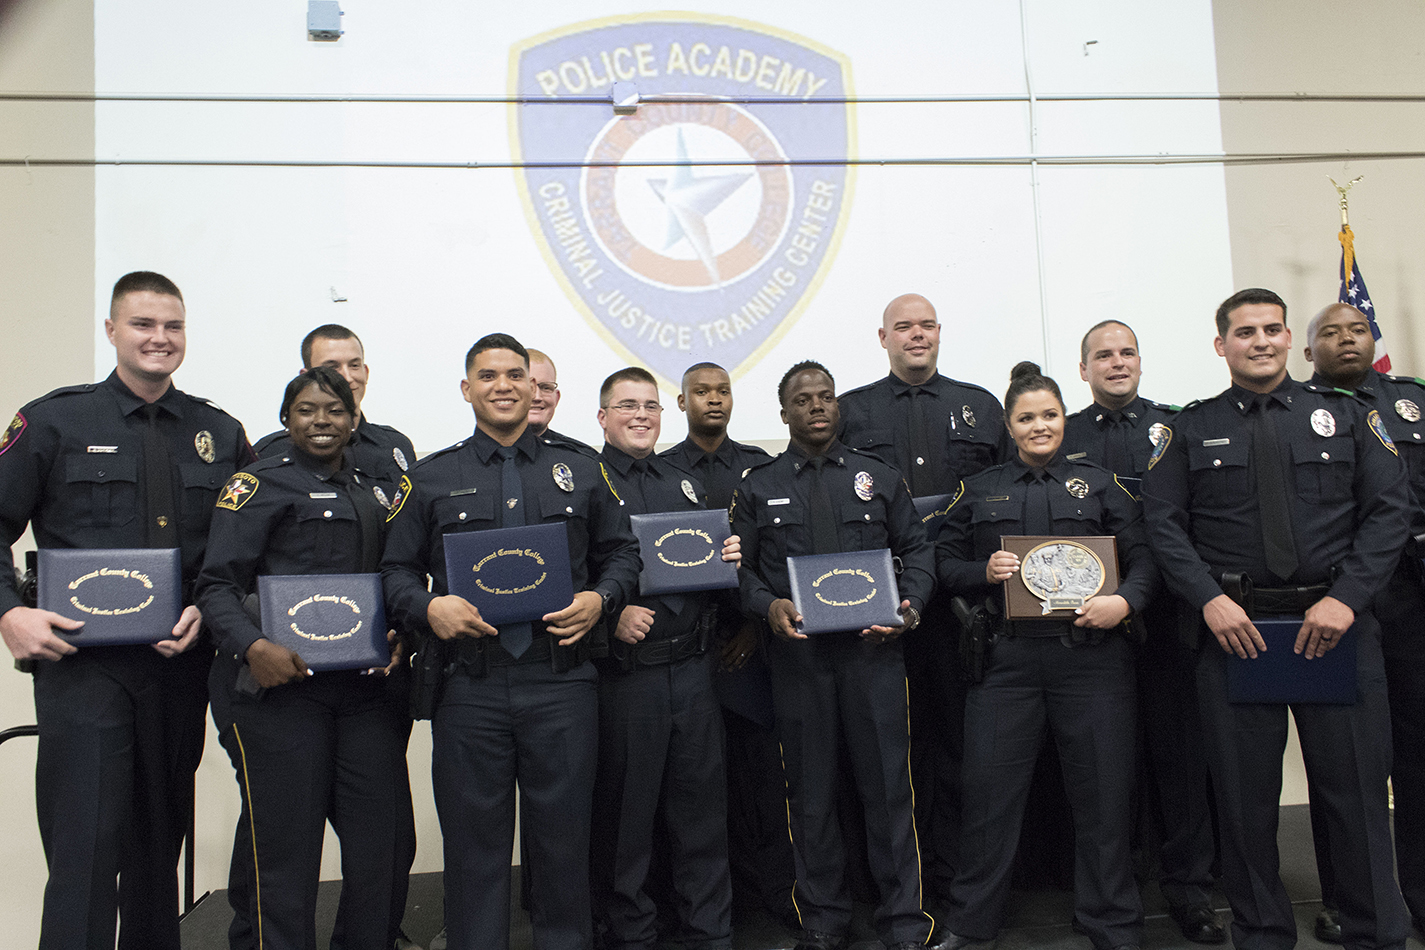 Recruits from TCC Police Academy’s Class 148 graduated Oct. 26 at the Forest Hill Civic and Convention Center The officers will work in cities including Bedford, Colleyville, DeSoto, Granbury and Haltom City.